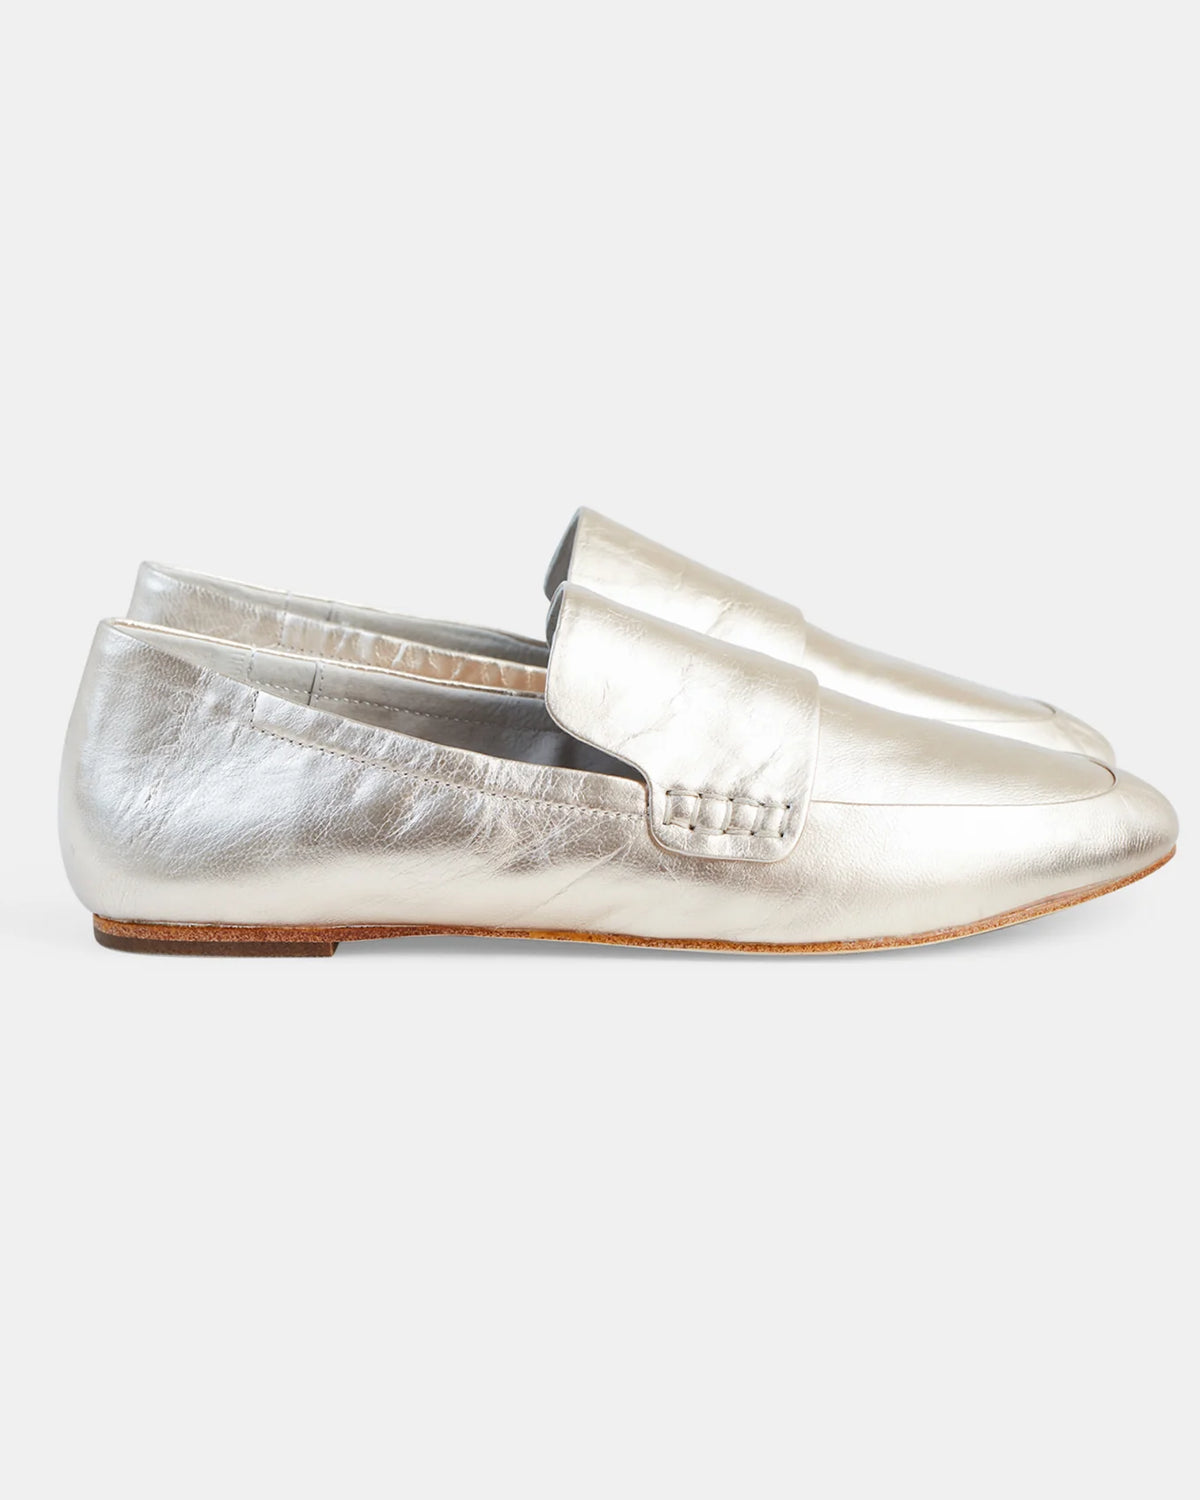 Dutch Leather Loafer